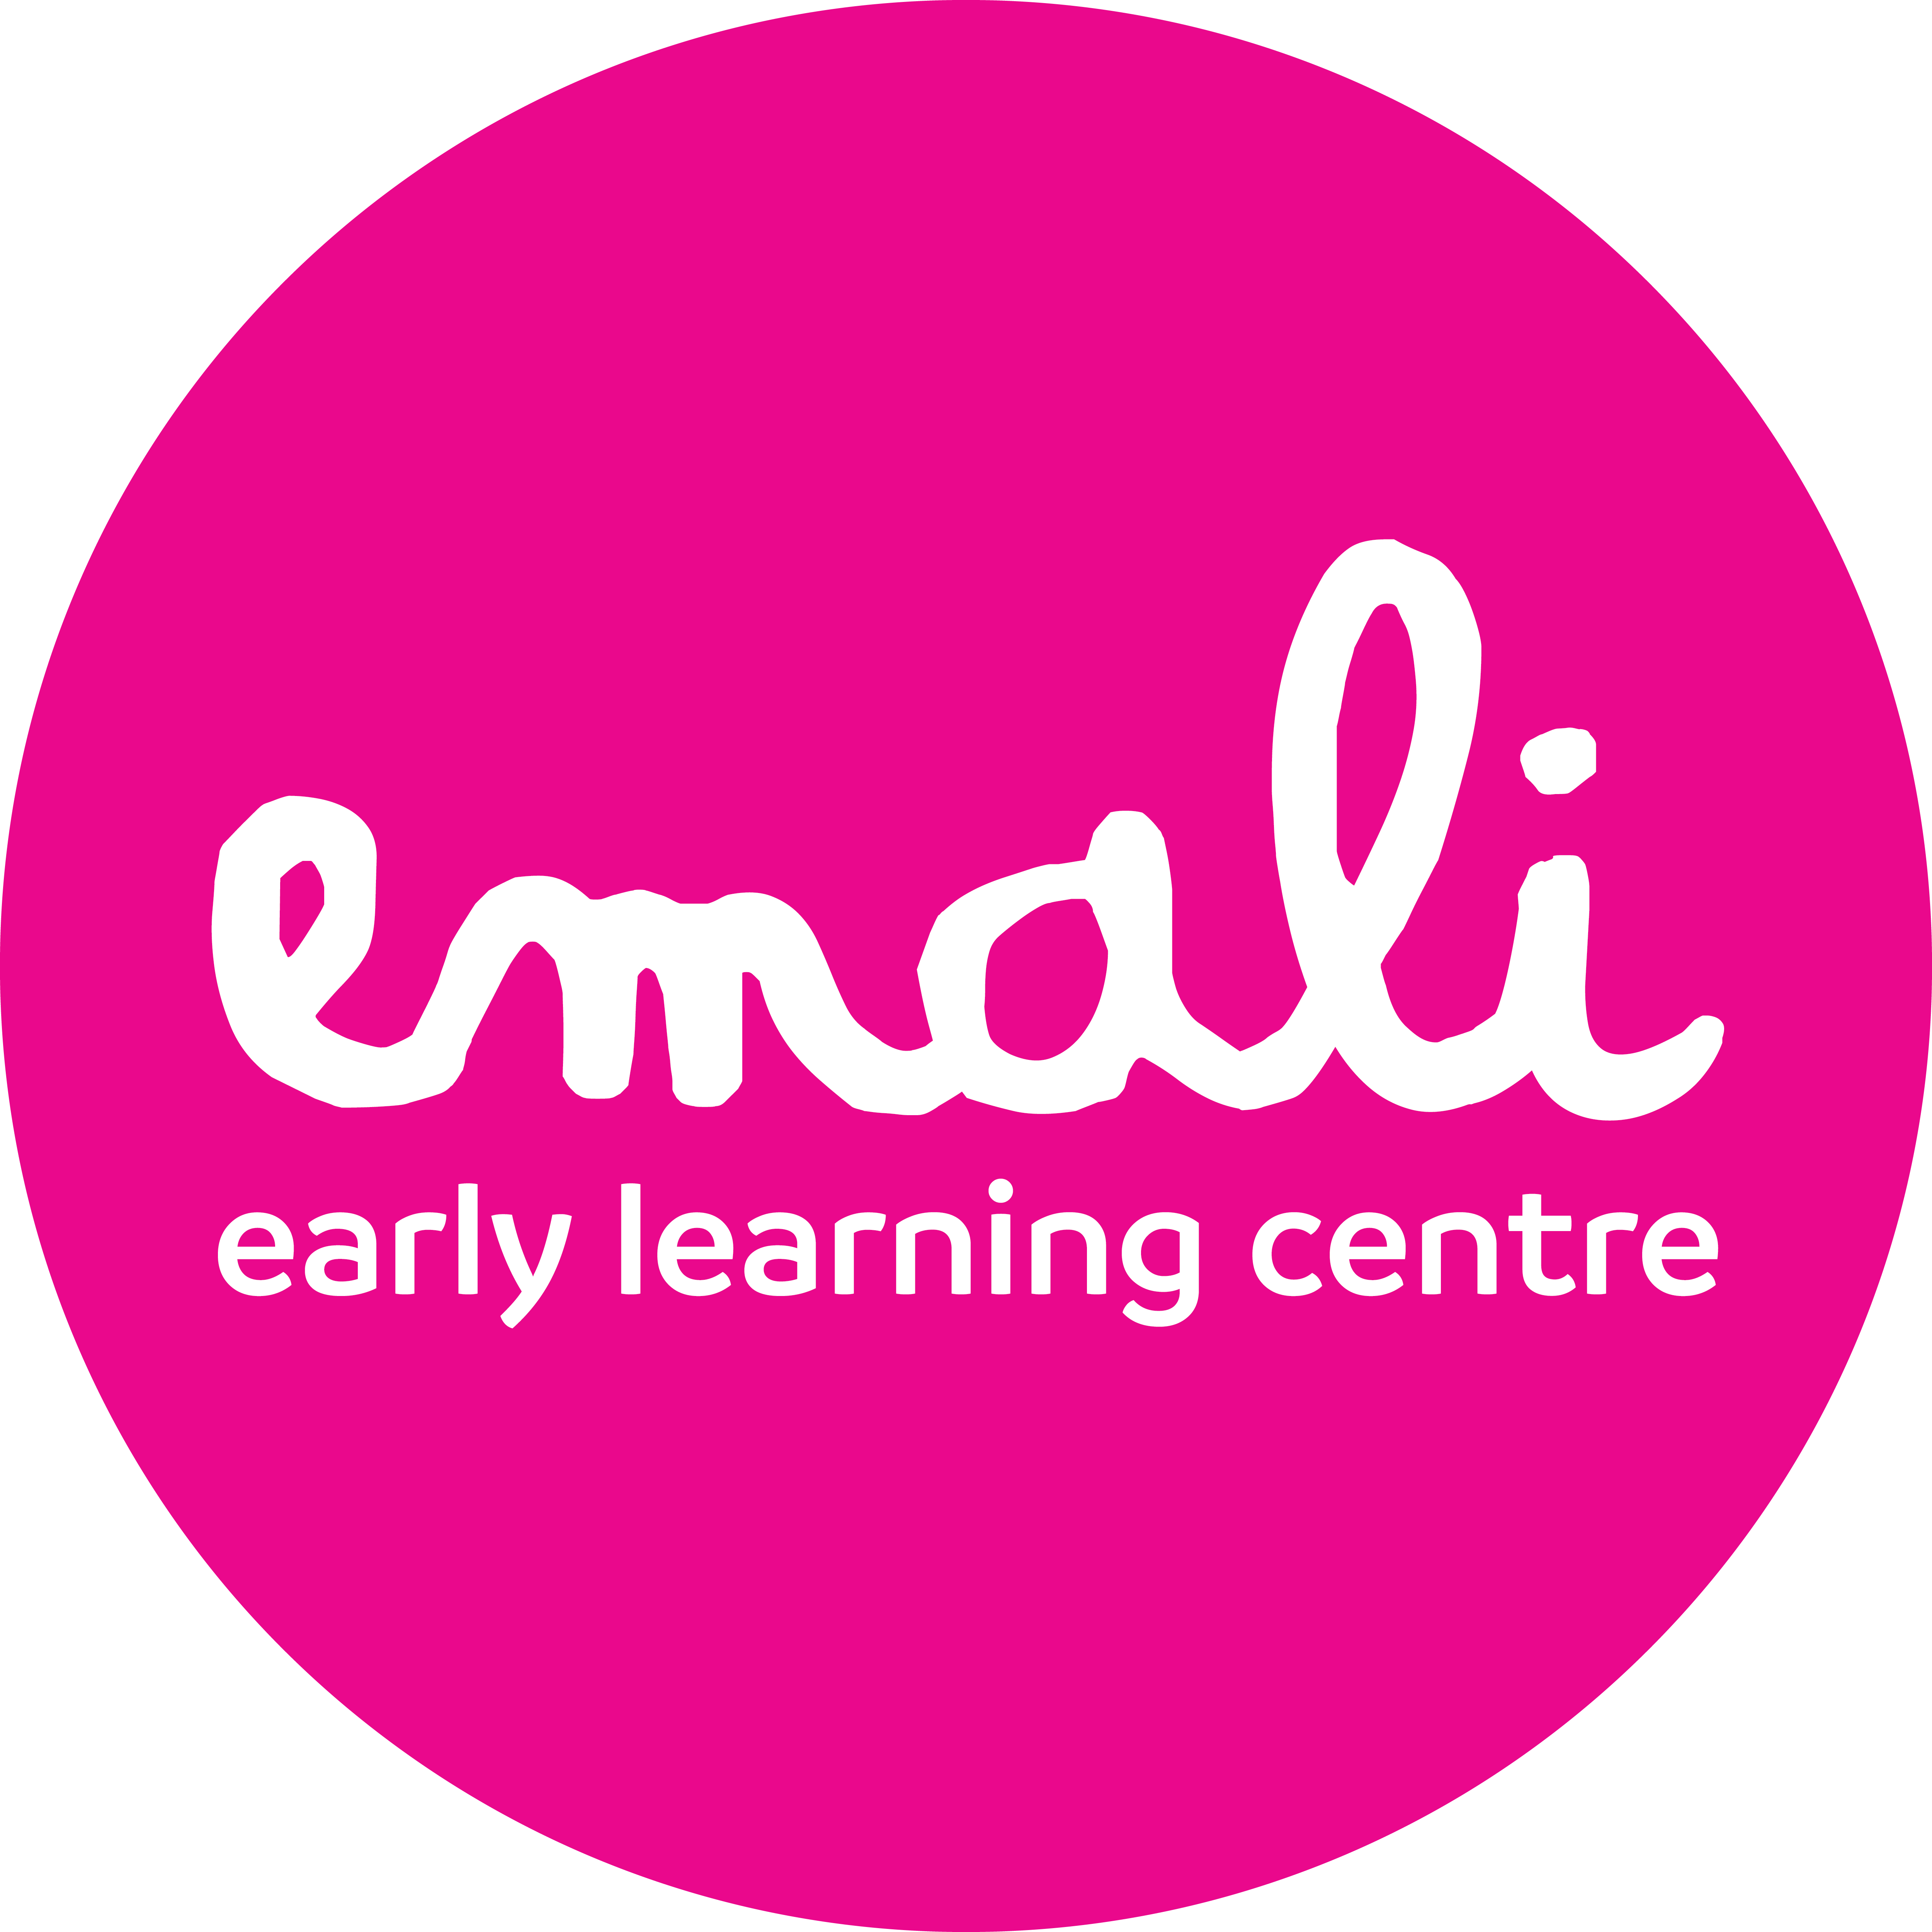 Emali Early Learning Centre - North Plympton